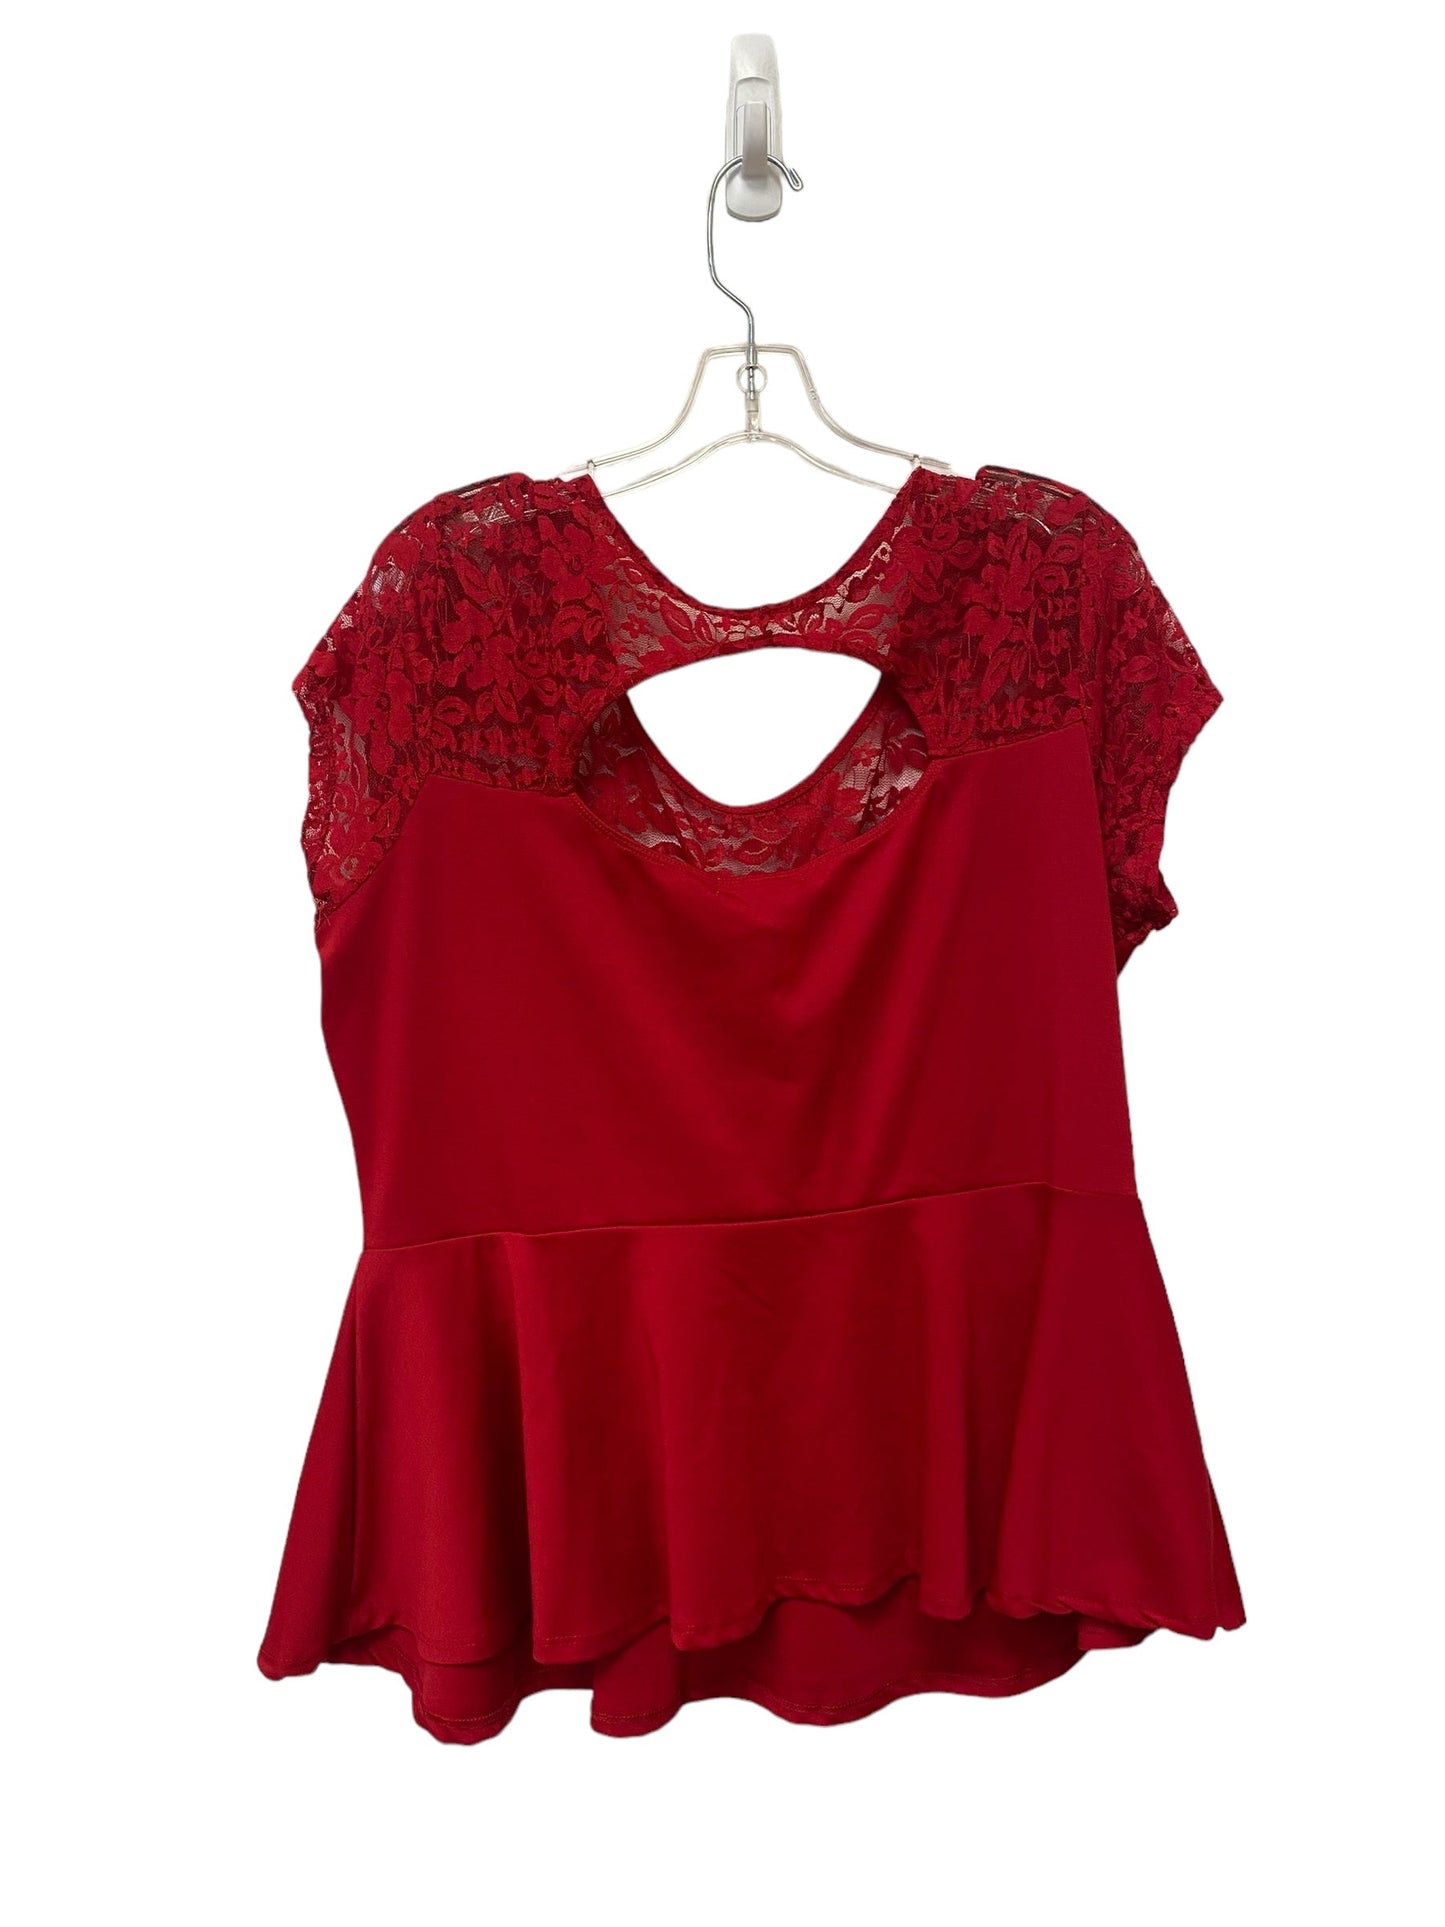 Red Top Short Sleeve Ambiance Apparel, Size 2x